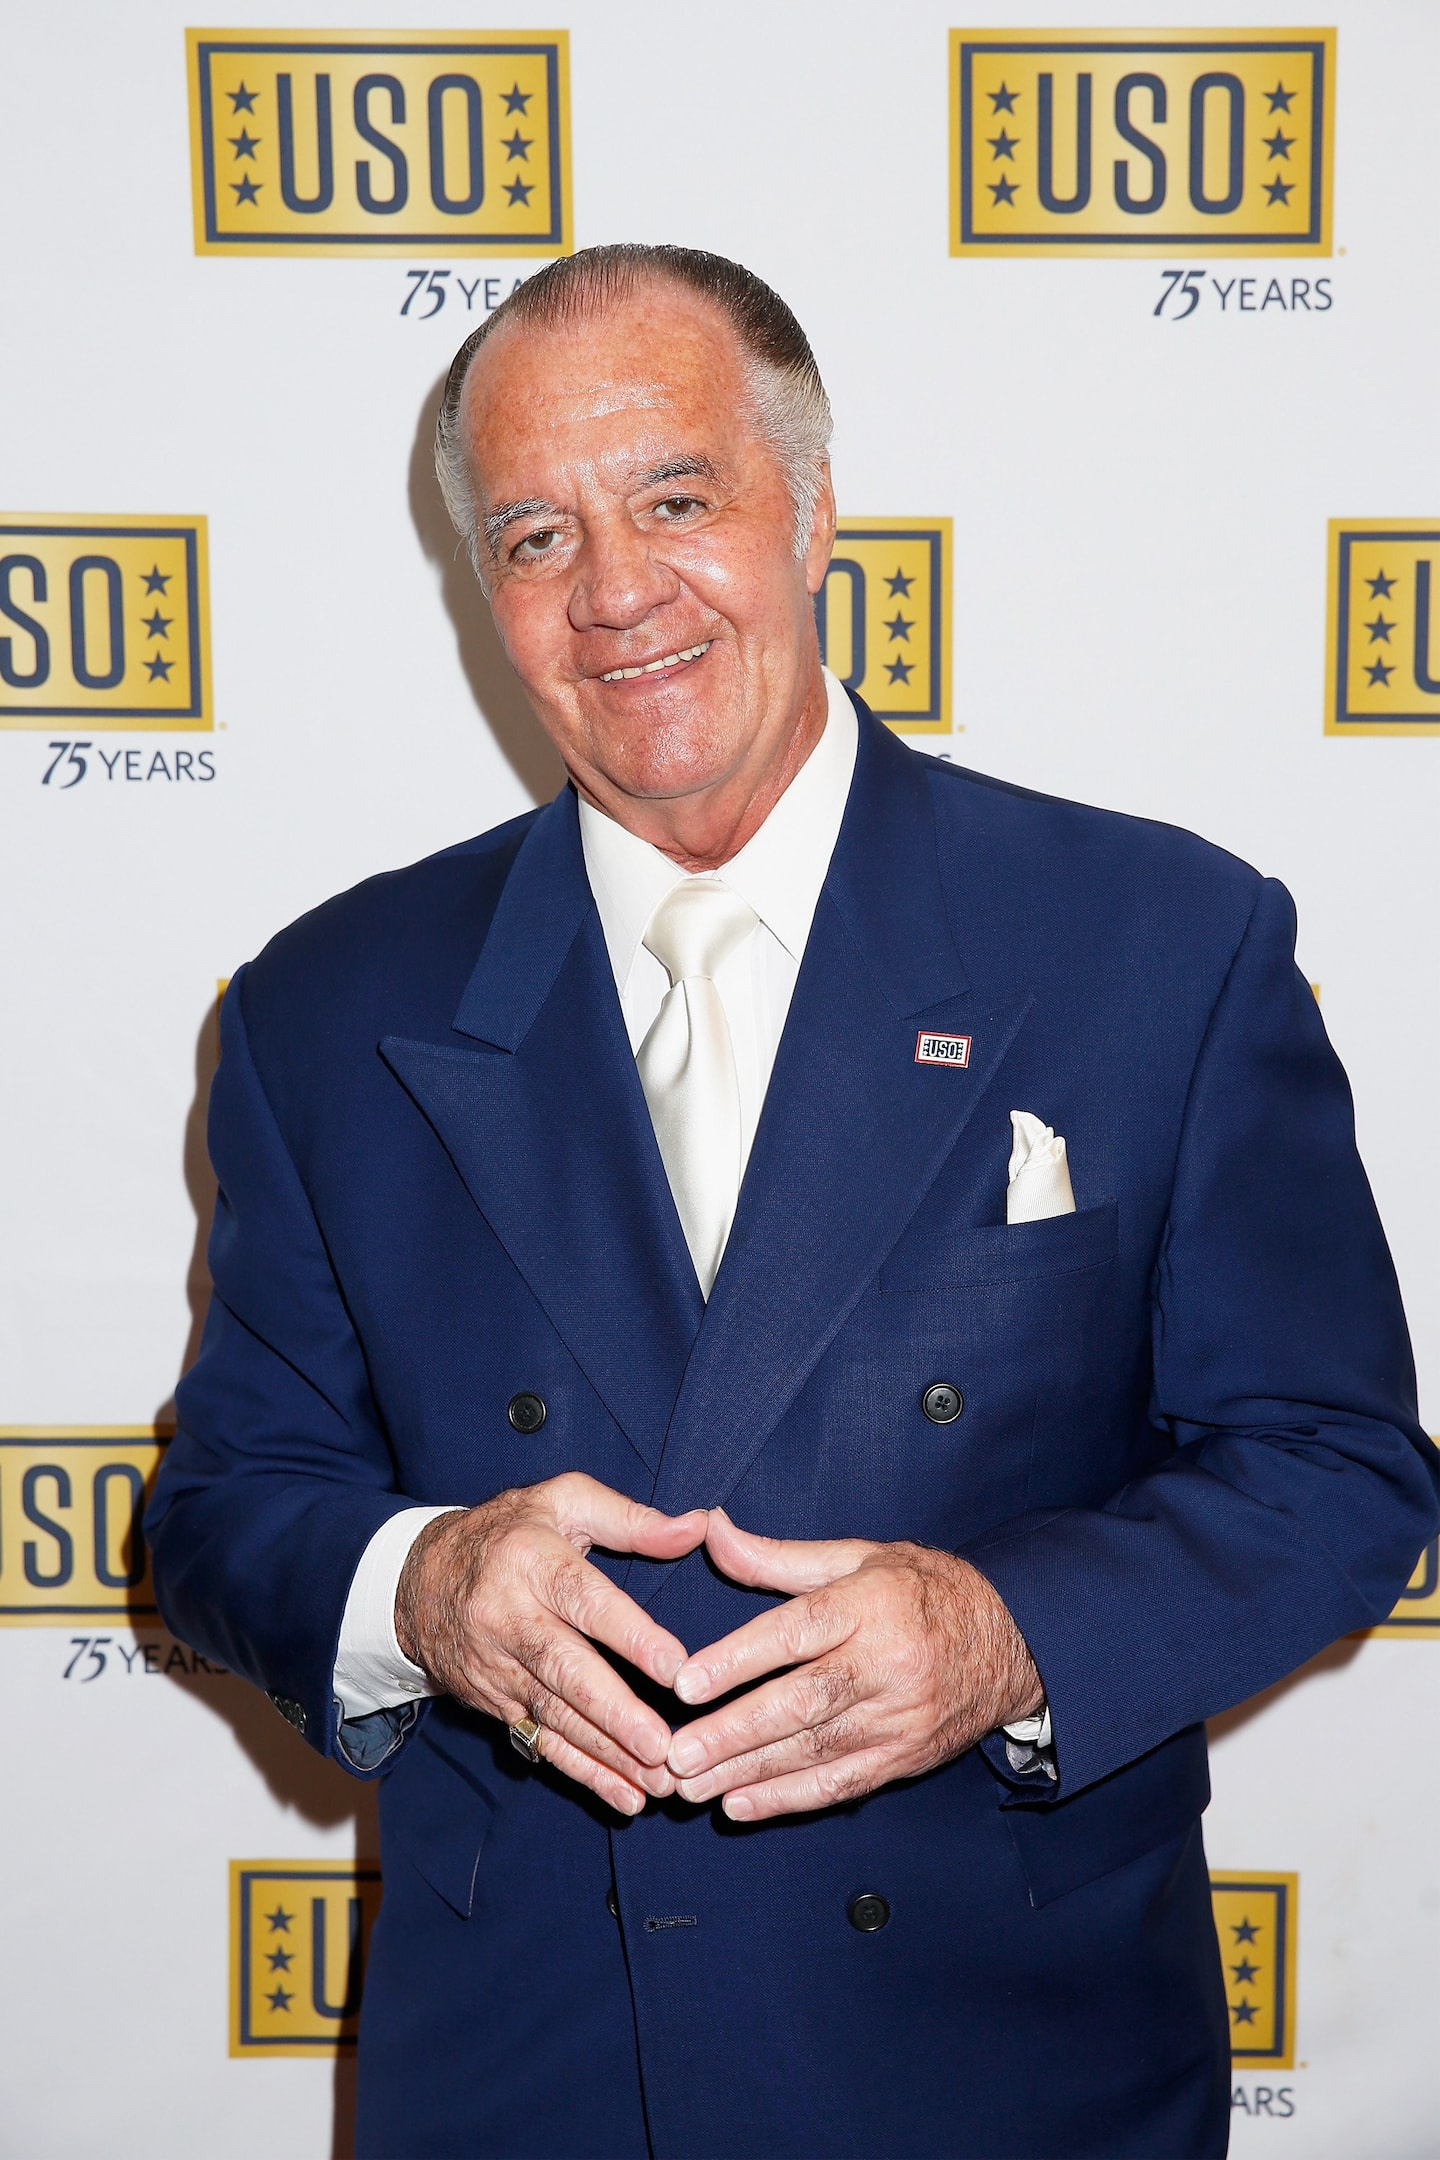 Death of Tony Sirico, star of the “Sopranos”, at the age of 79